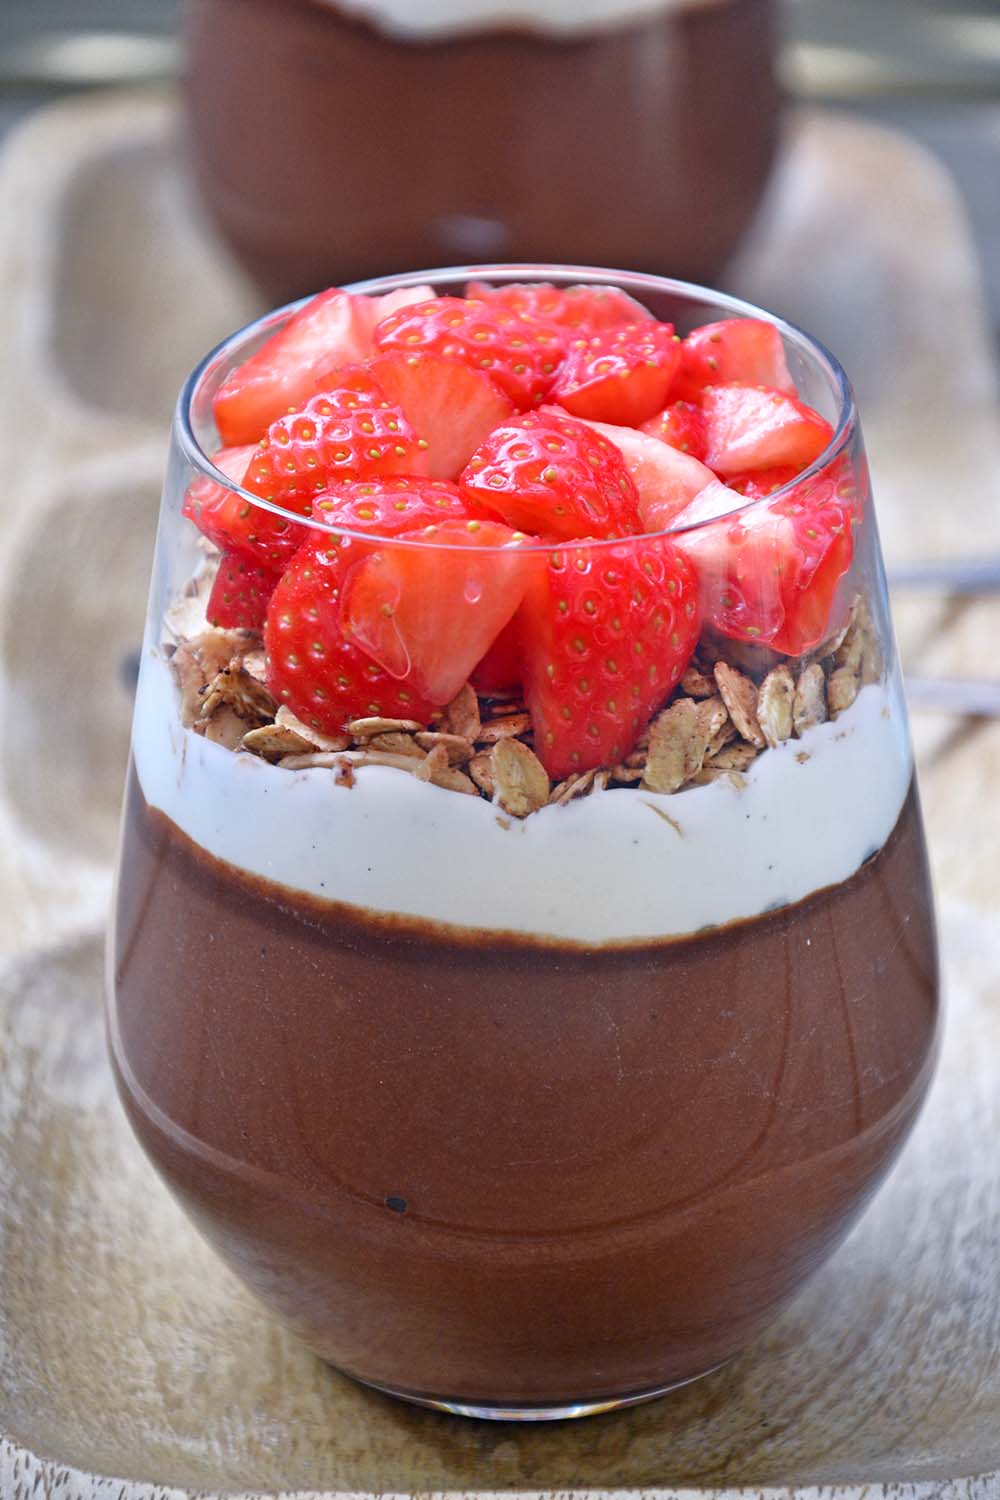 Healthy chocolate pudding